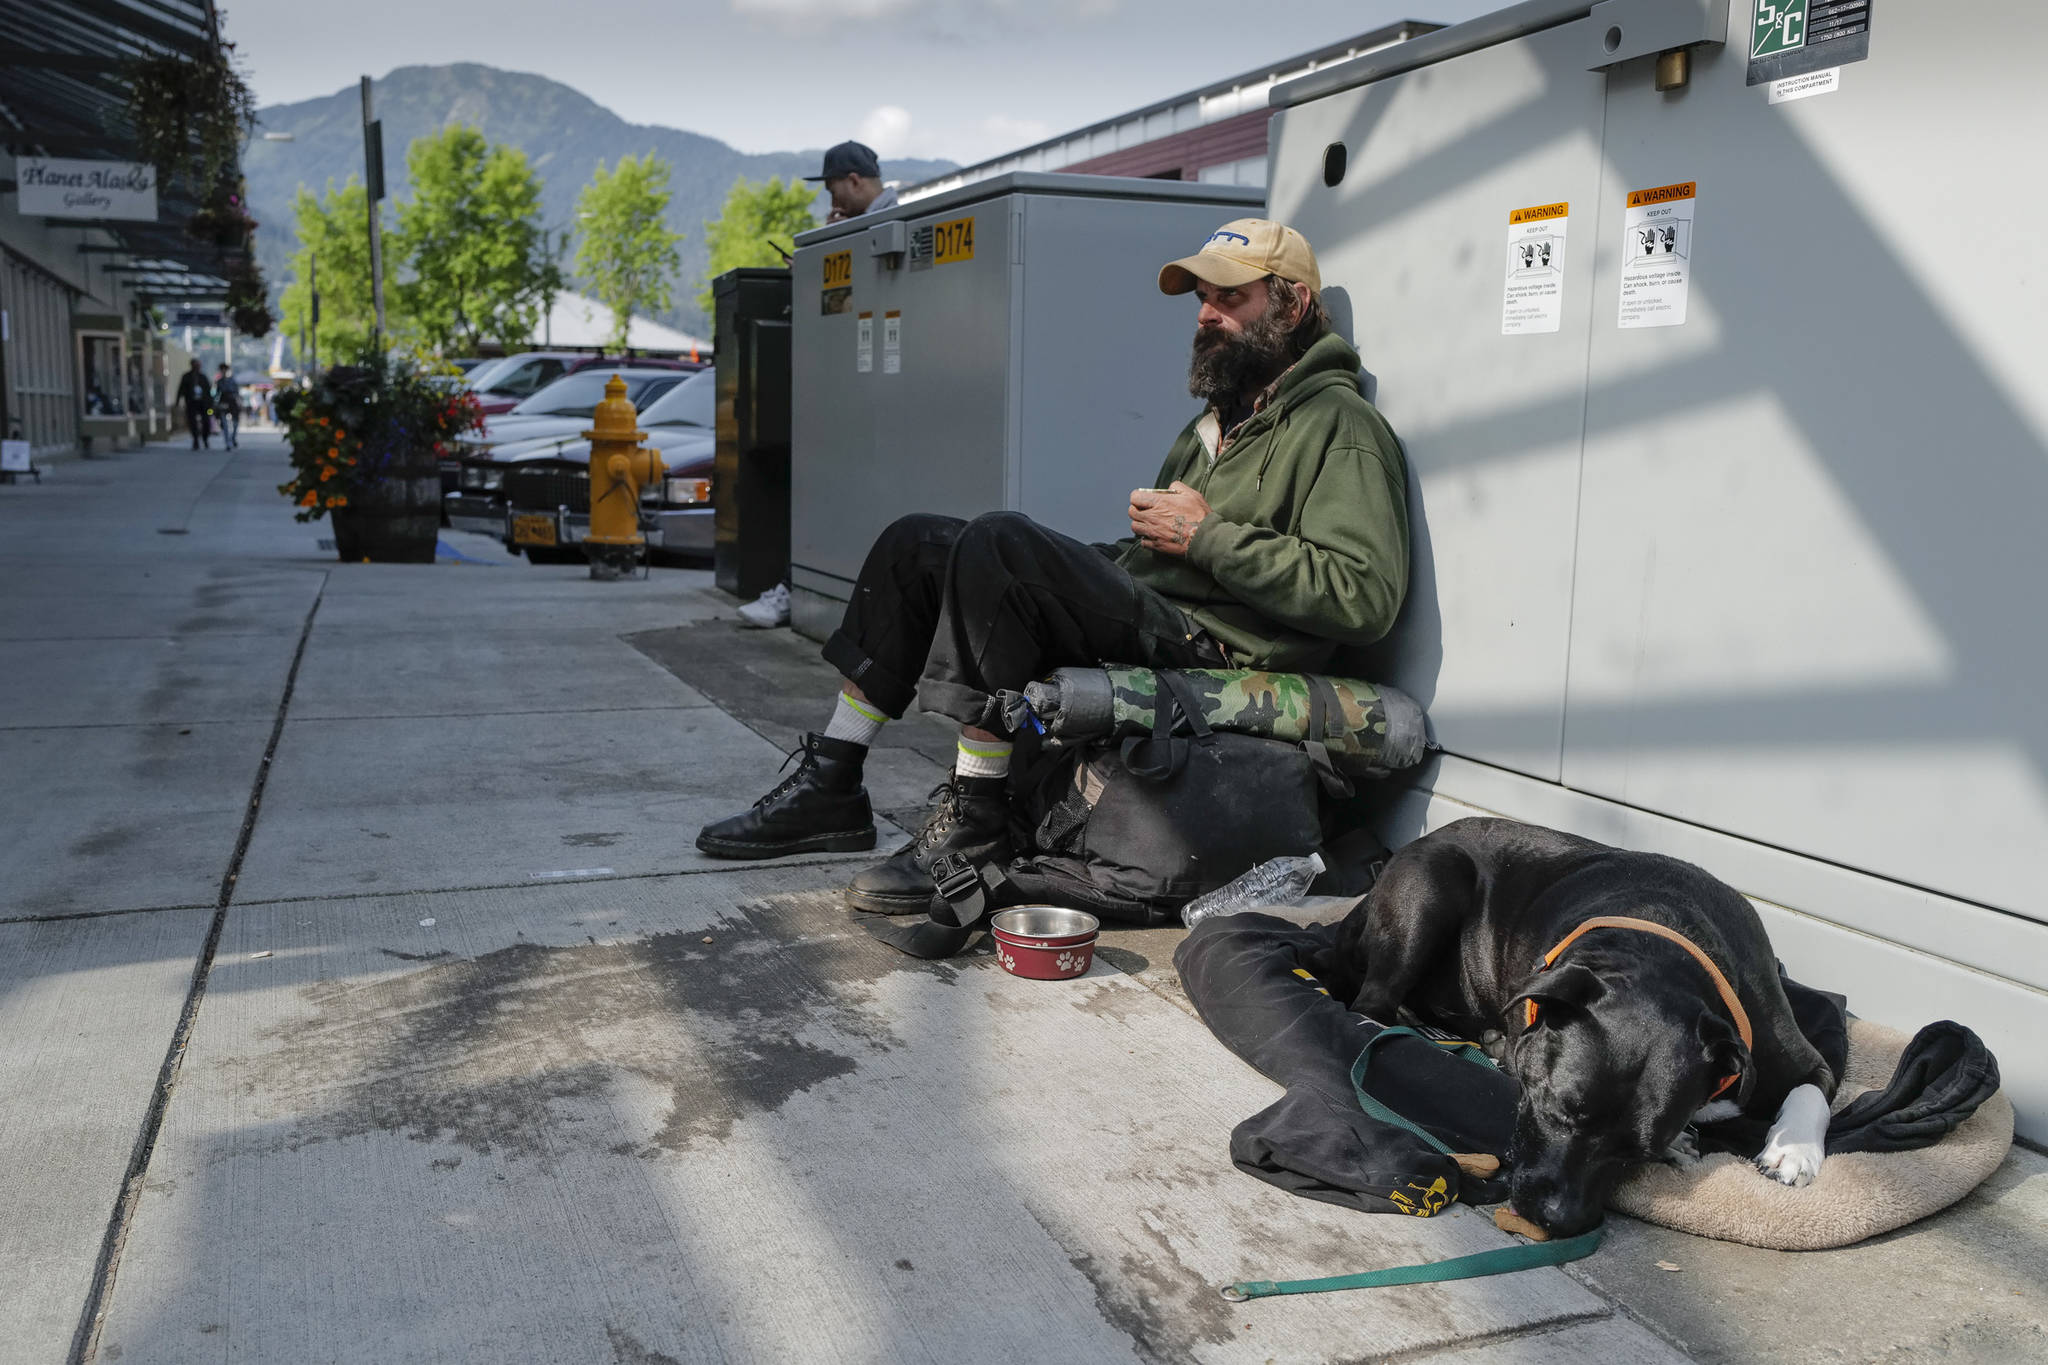 Woody MacAllister hangs out on Franklin Street at Ferry Way with his dog, Rainy, on Tuesday, Aug. 13, 2019. McAllister said he doesn’t stay at the Glory Hall, Juneau’s emergency shelter and soup kitchen, but does eat there. The shelter is closing their doors from 7 a.m. to 2 p.m. daily due to budget cuts forcing their homeless clients to find other places to be. Oatmeal and coffee were available to clients before leaving the shelter but no lunch is available. (Michael Penn | Juneau Empire)